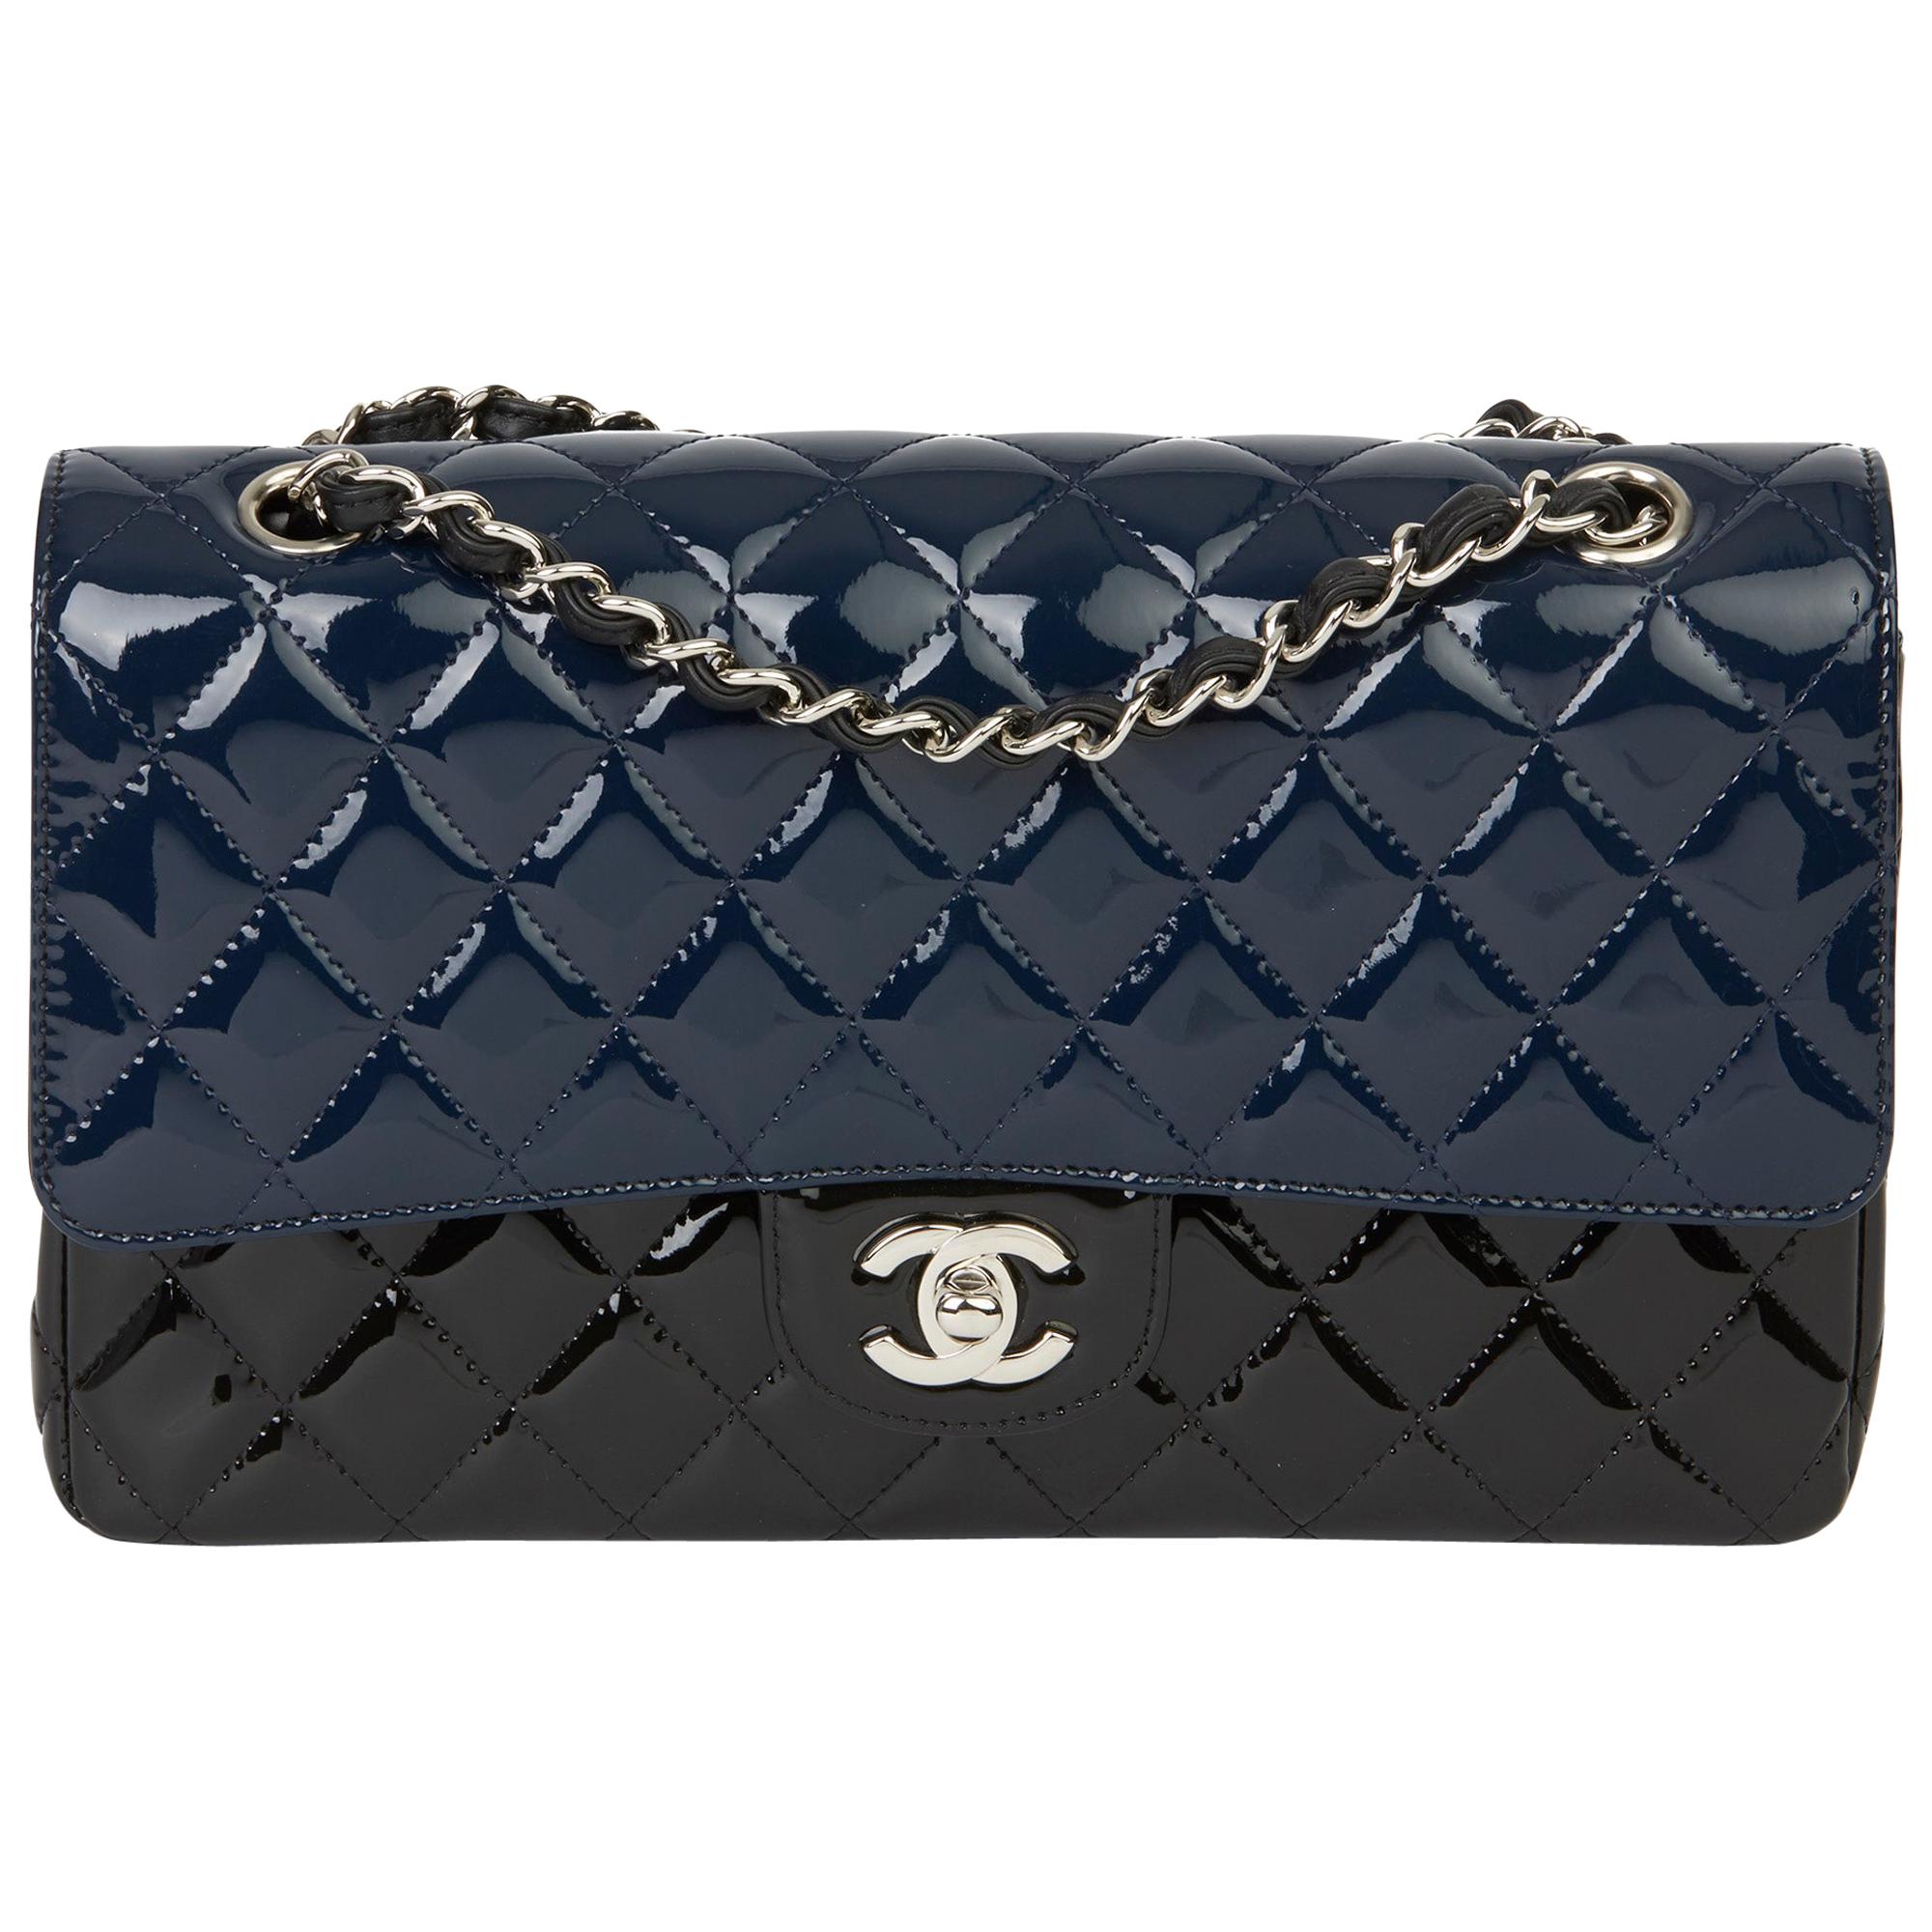 2020 Chanel Black & Navy Quilted Patent Leather Medium Classic Double Flap Bag